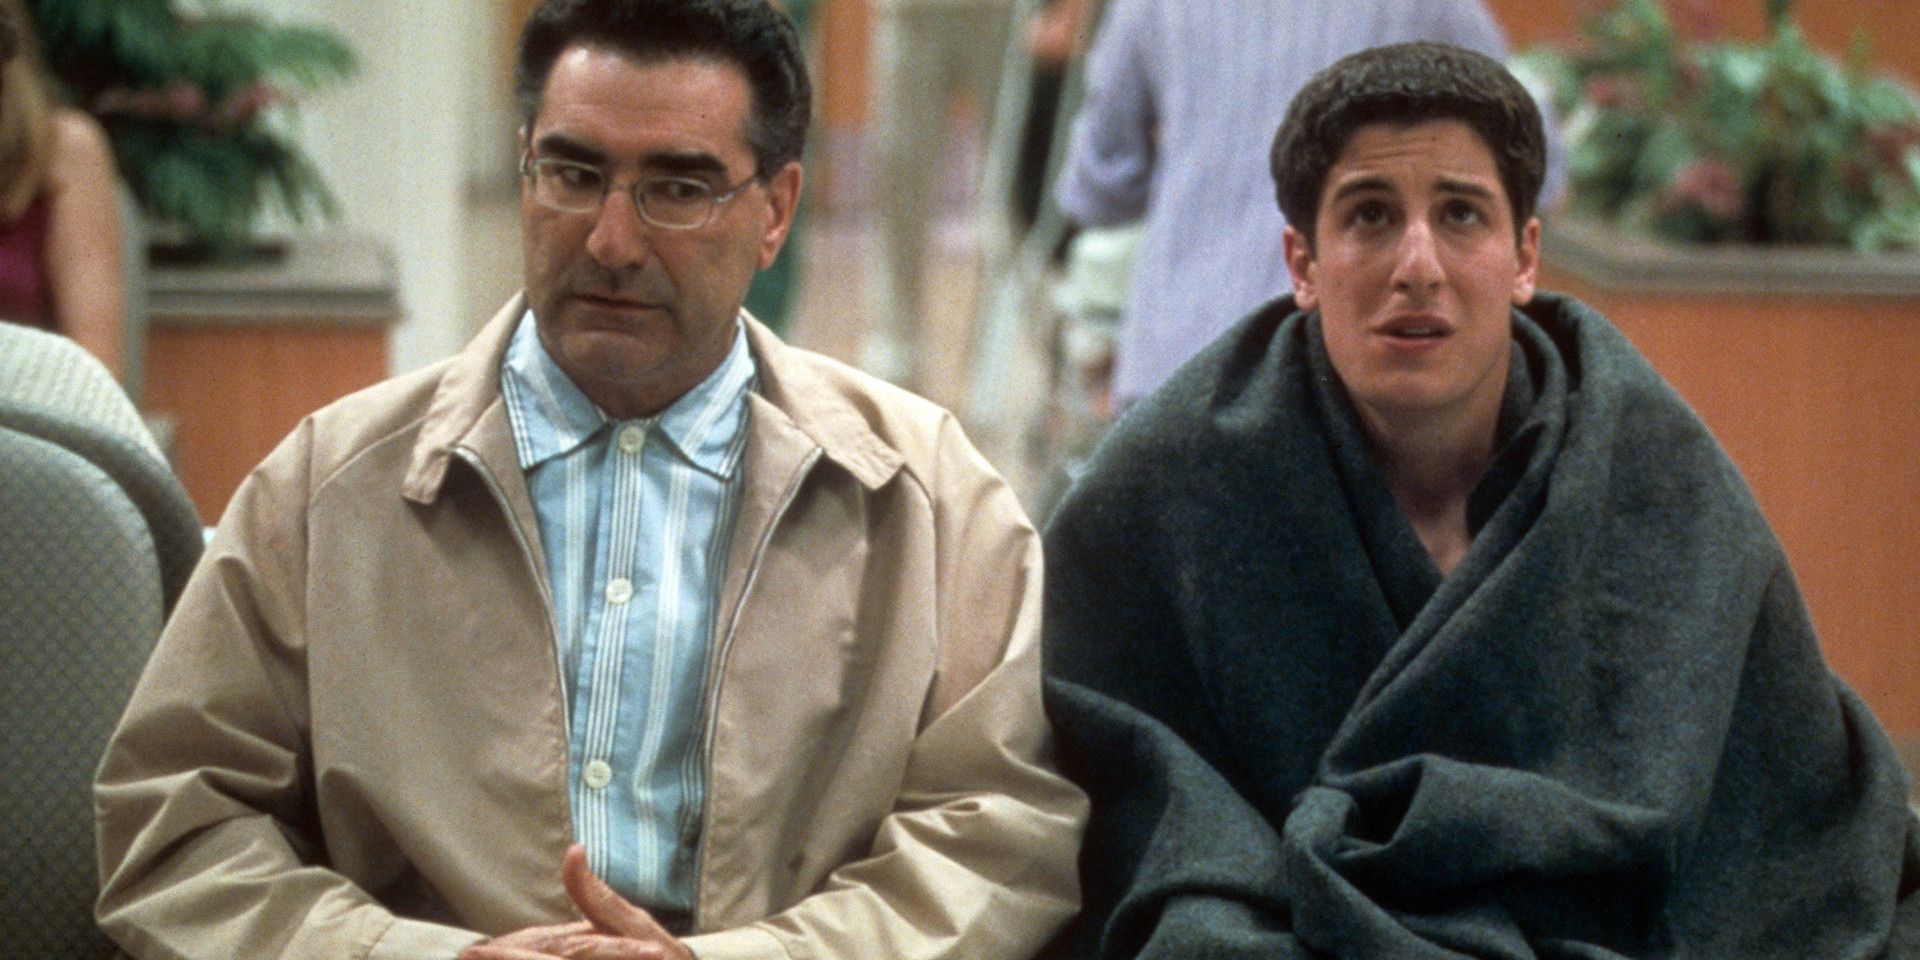 American Pie 2 - Eugene Levy as Jim's Dad and Jason Biggs as Jim